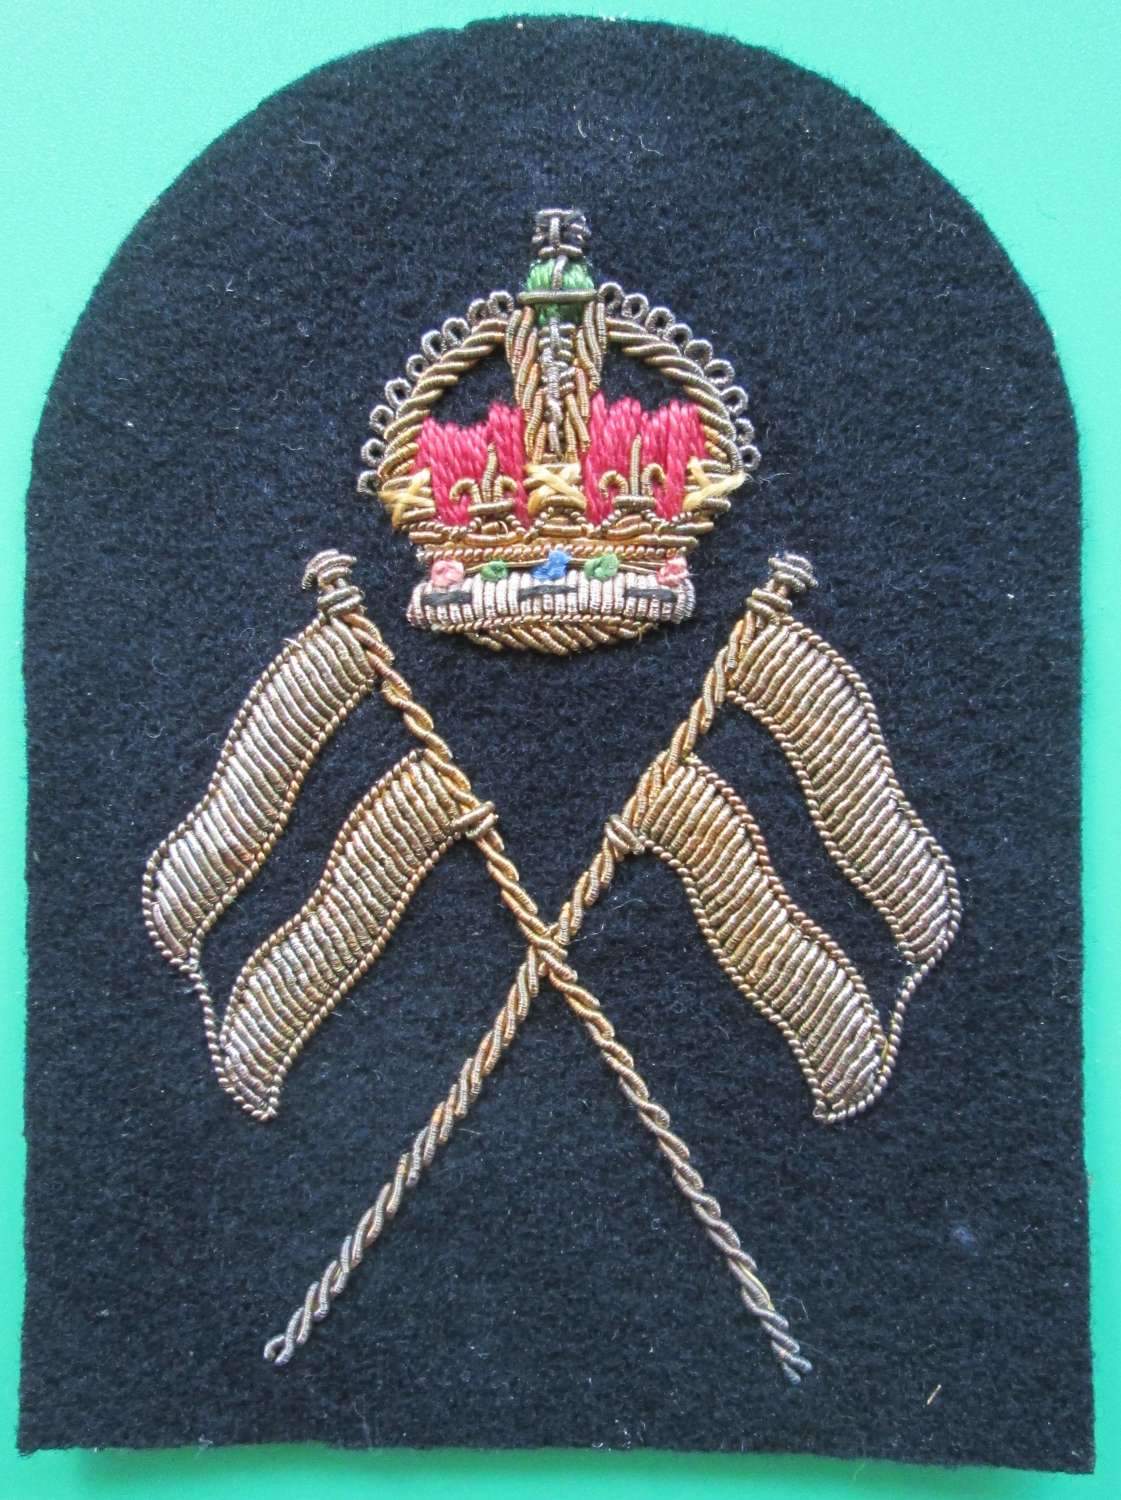 A ROYAL NAVAL PO'S TACTICAL SIGNALS TOMBSTONE BADGE